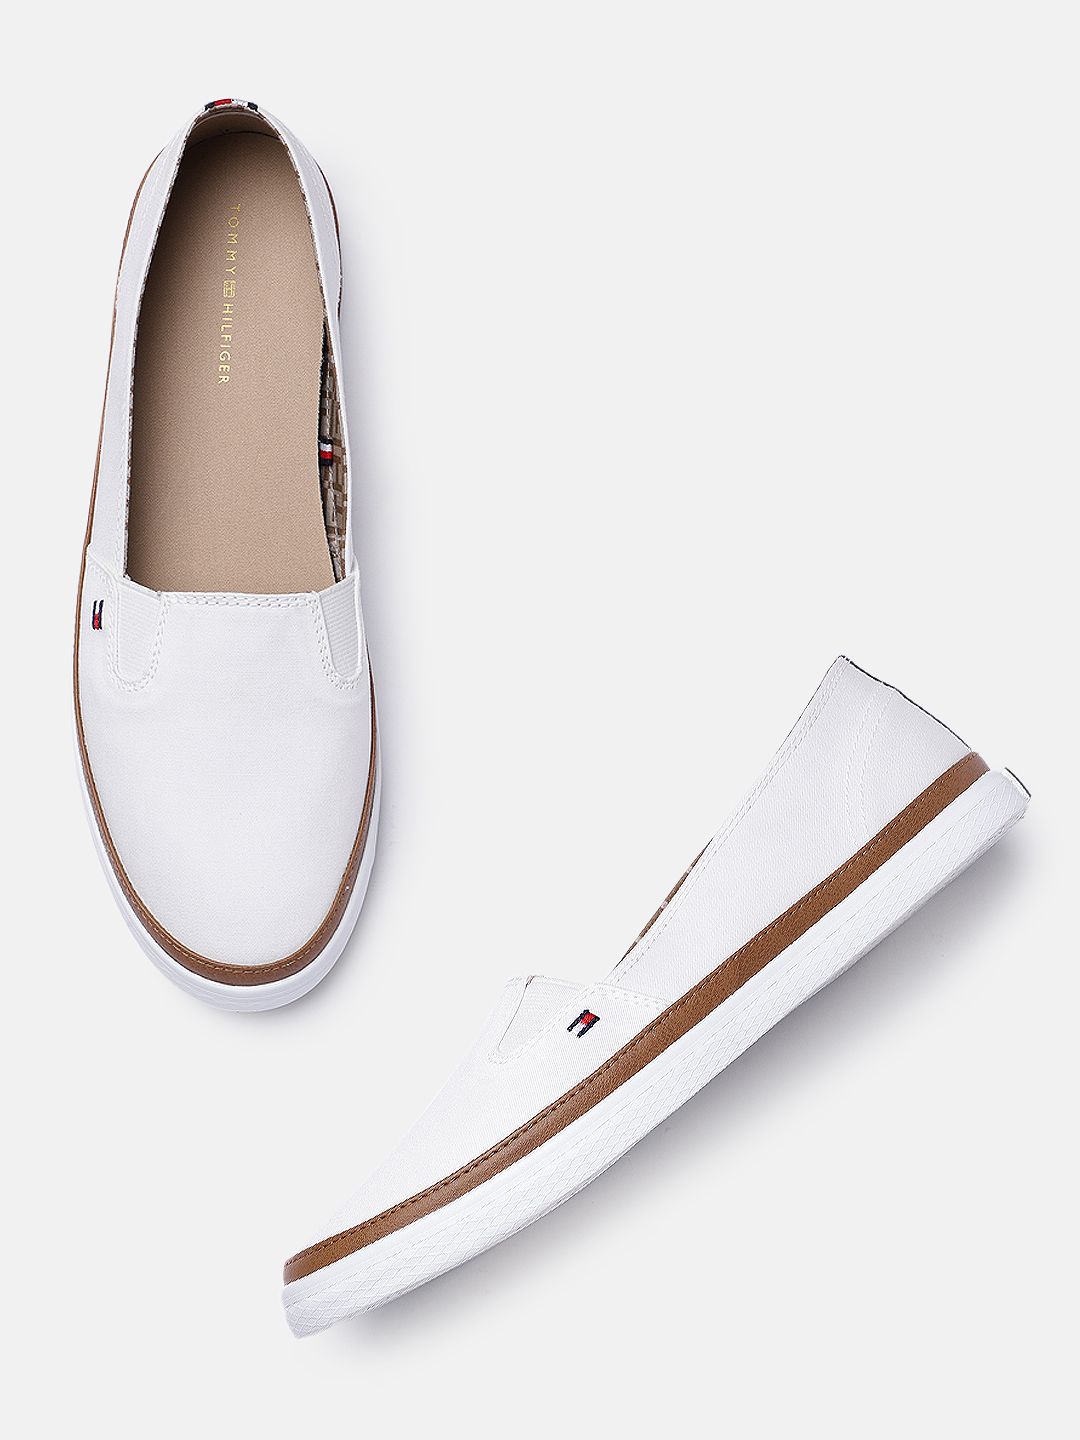 Tommy Hilfiger Women White Solid Slip-On Sneakers Price in India